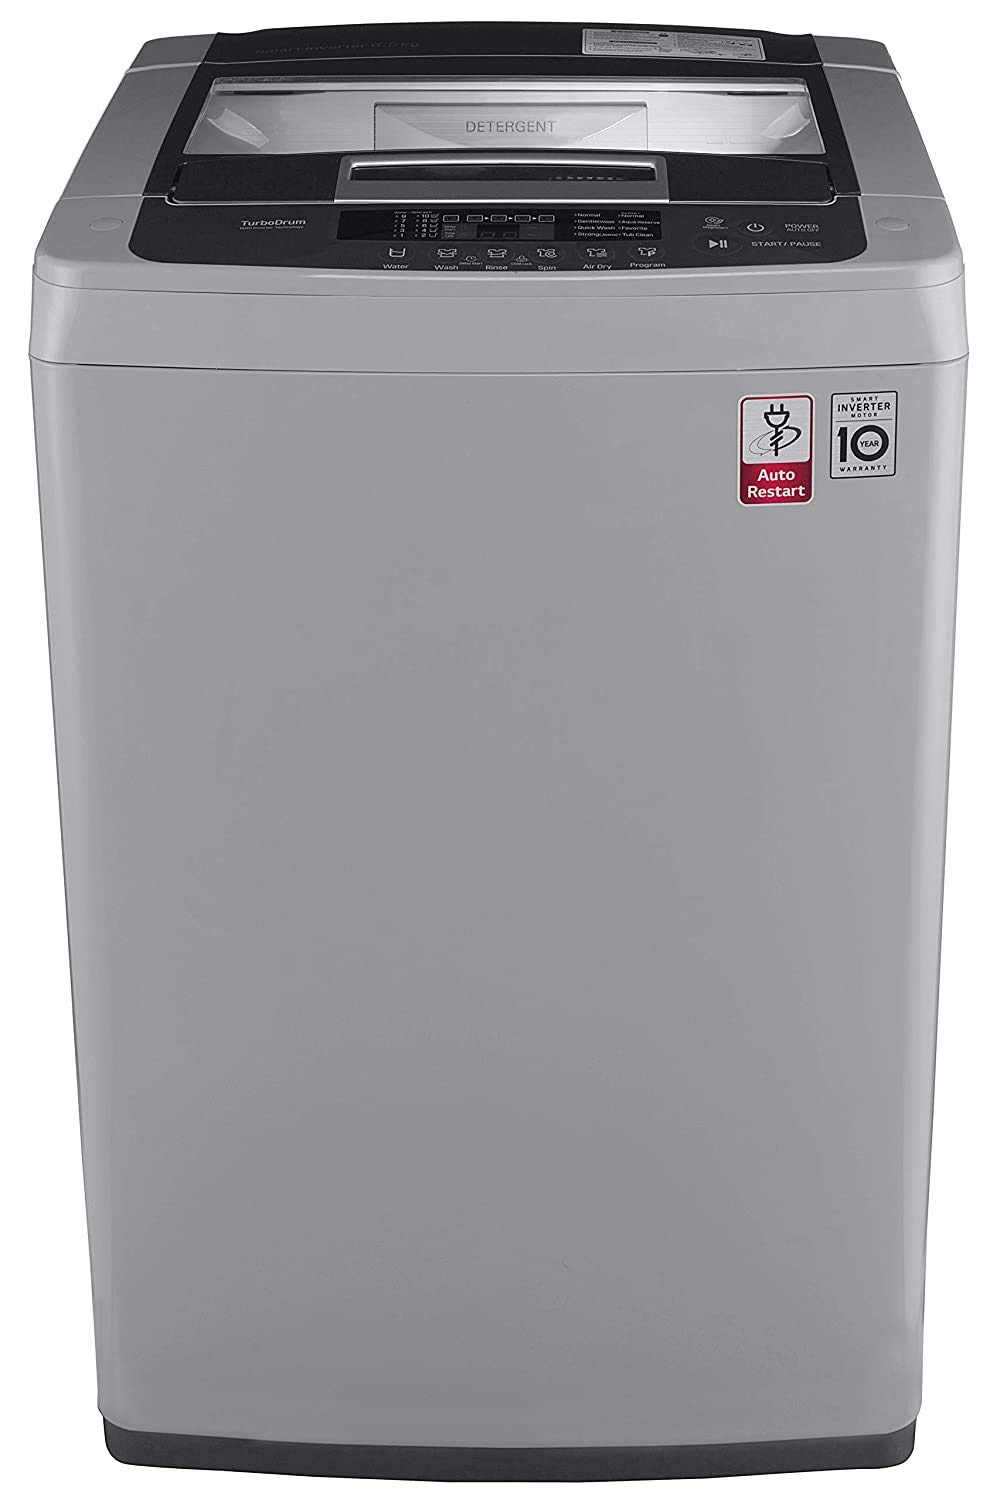 shopNext Best Fully Automatic Top Loading Washing Machines based on